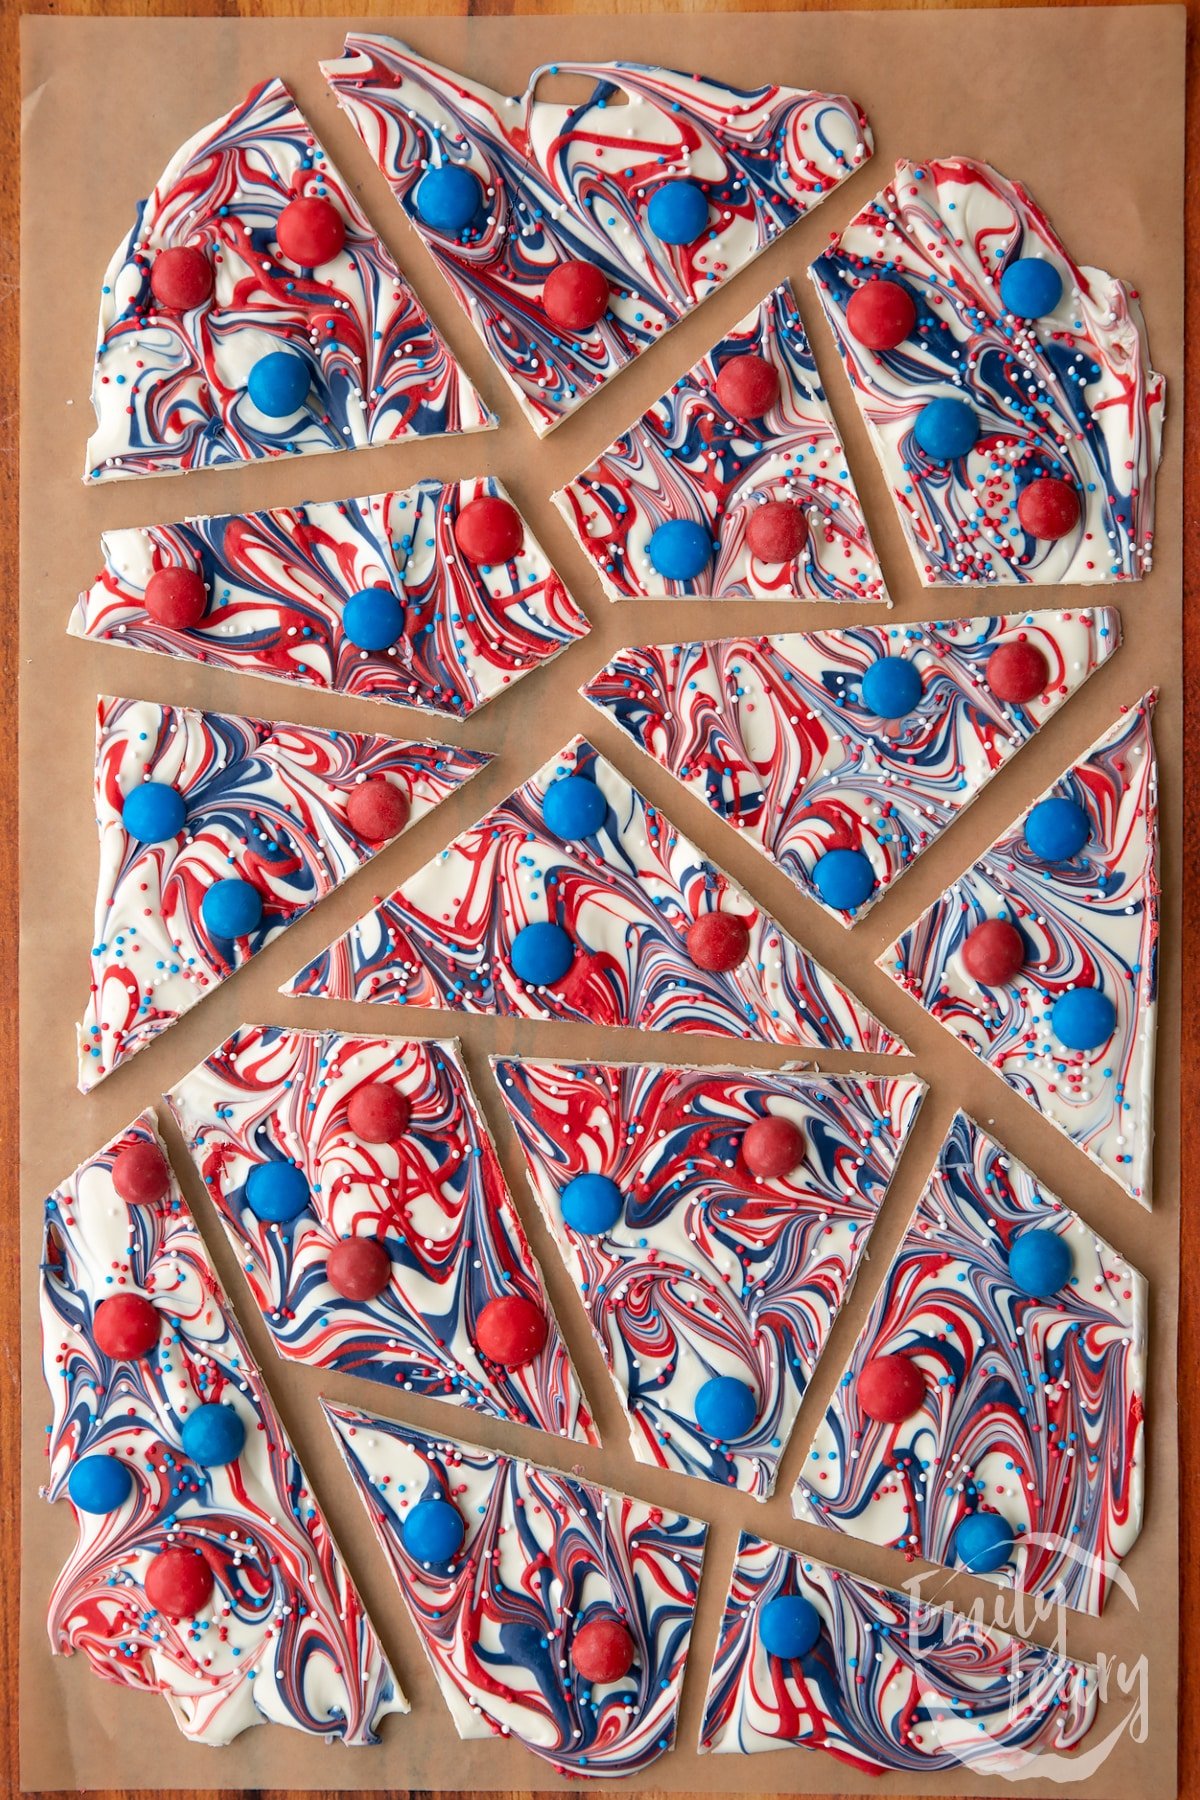 The finished red, white and blue bark. served on baking paper split into serving pieces. 